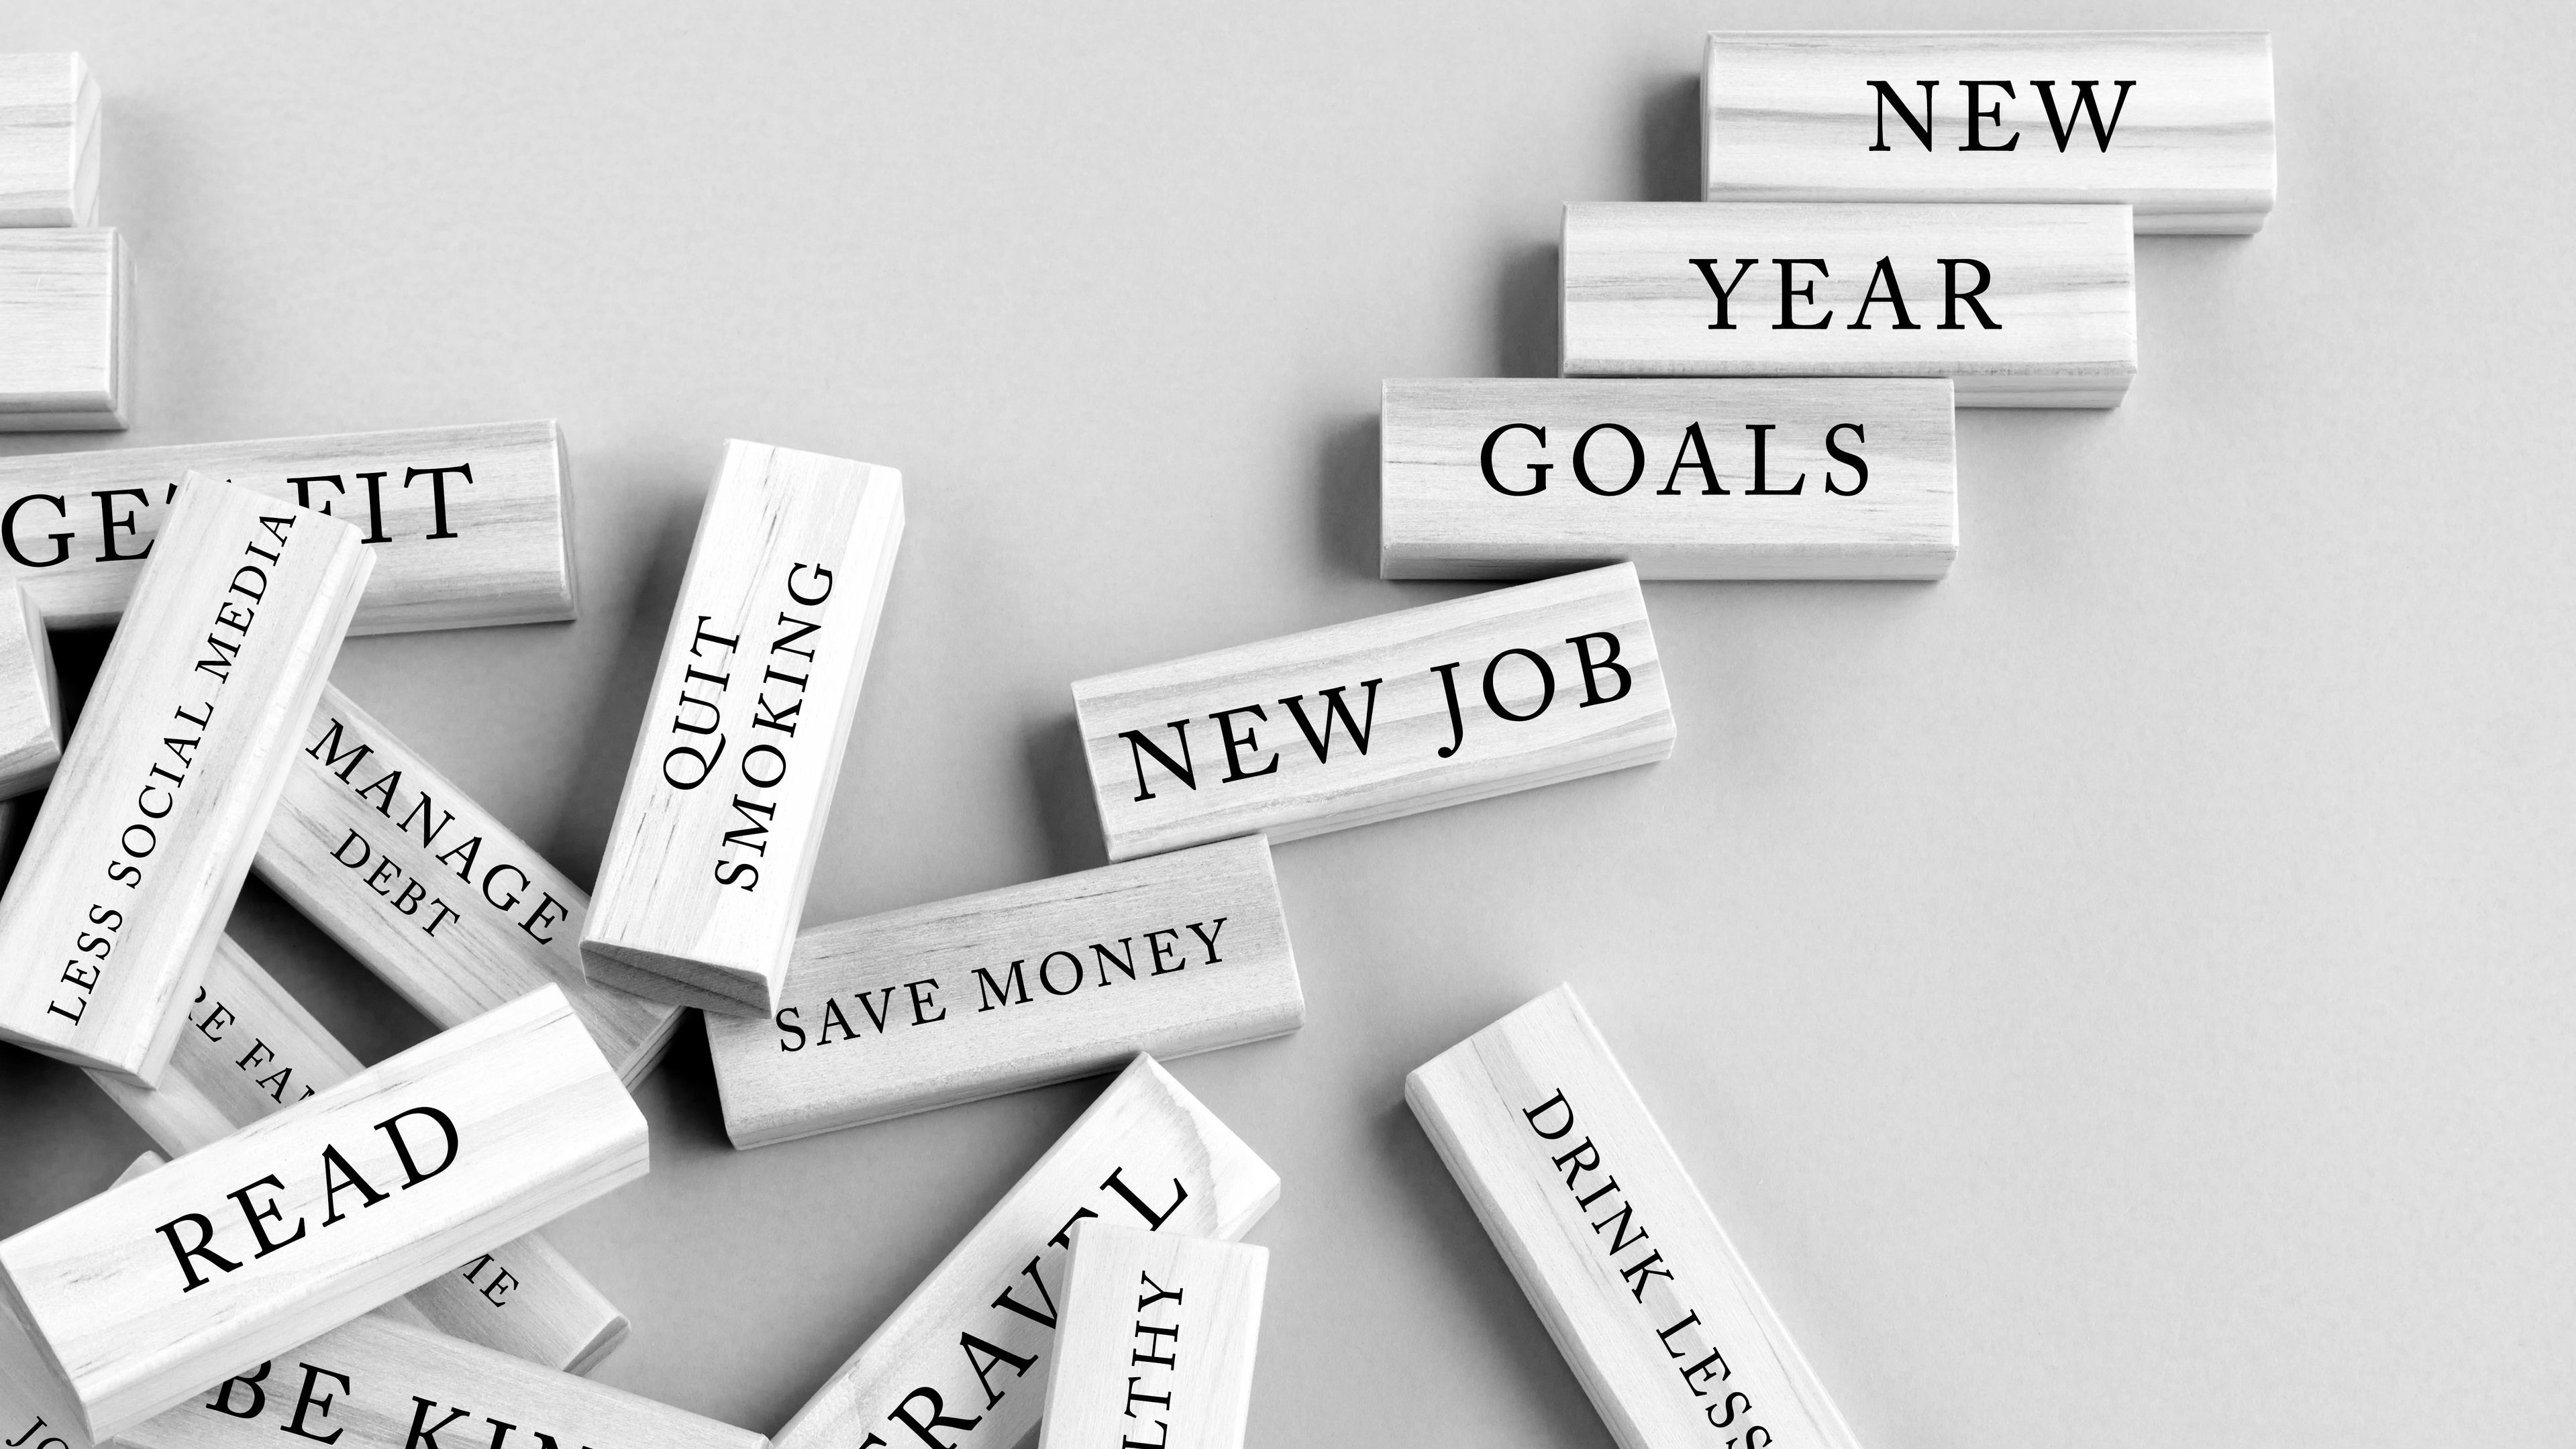 5 Simple Steps to Make this Your Best Year Yet